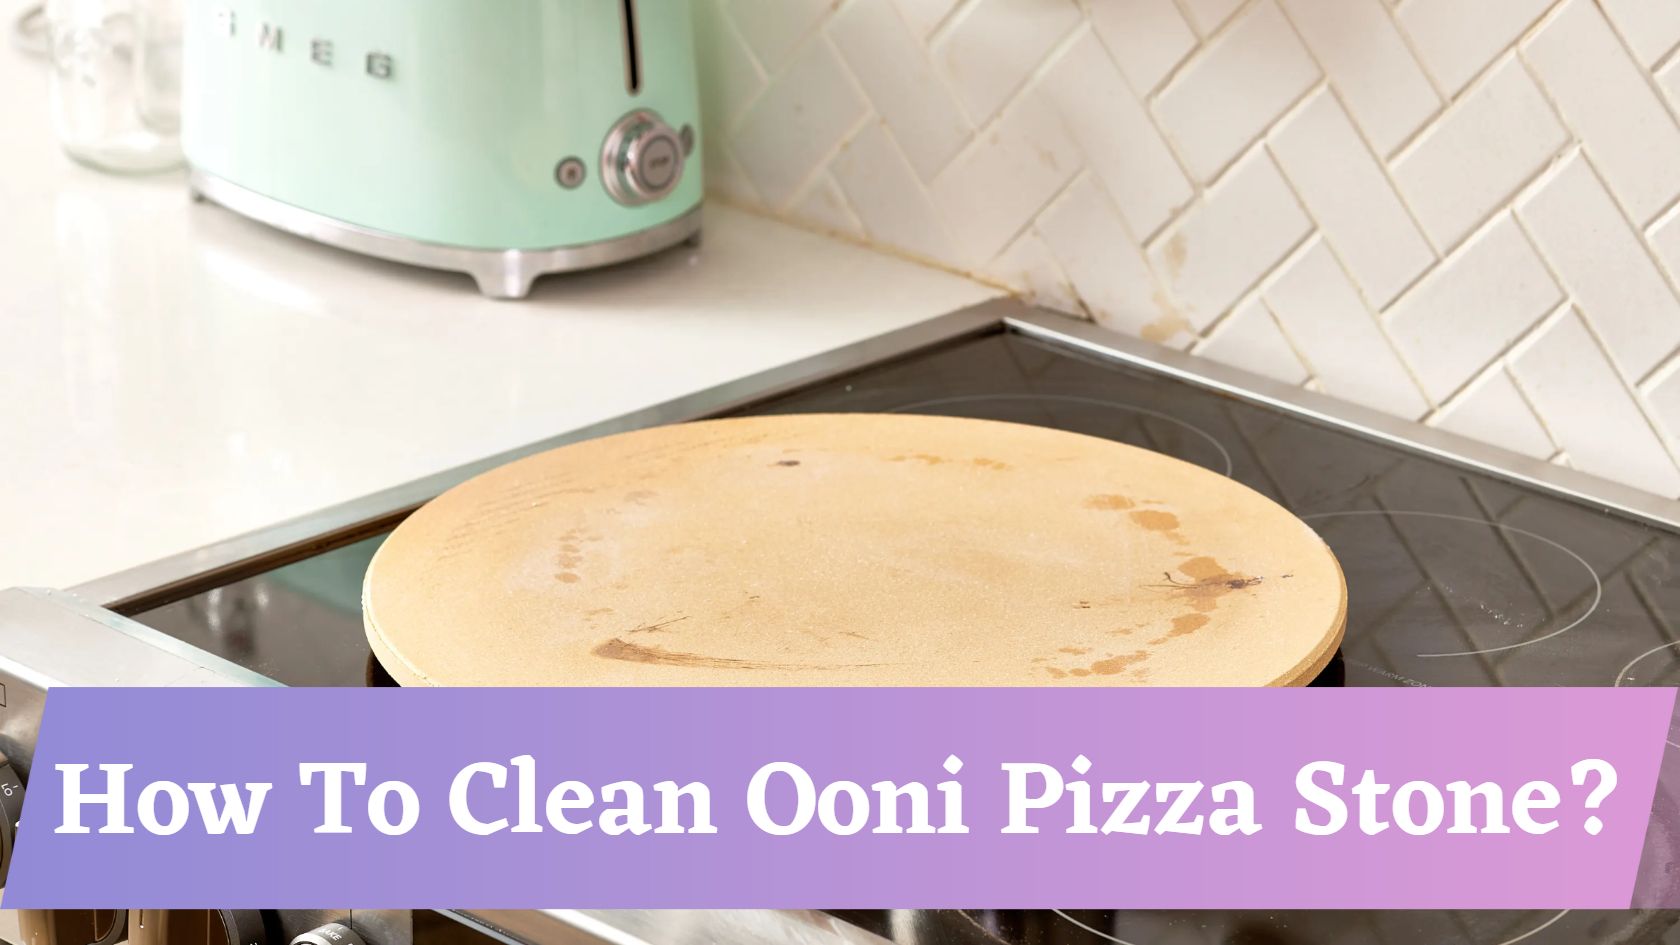 How To Clean Ooni Pizza Stone